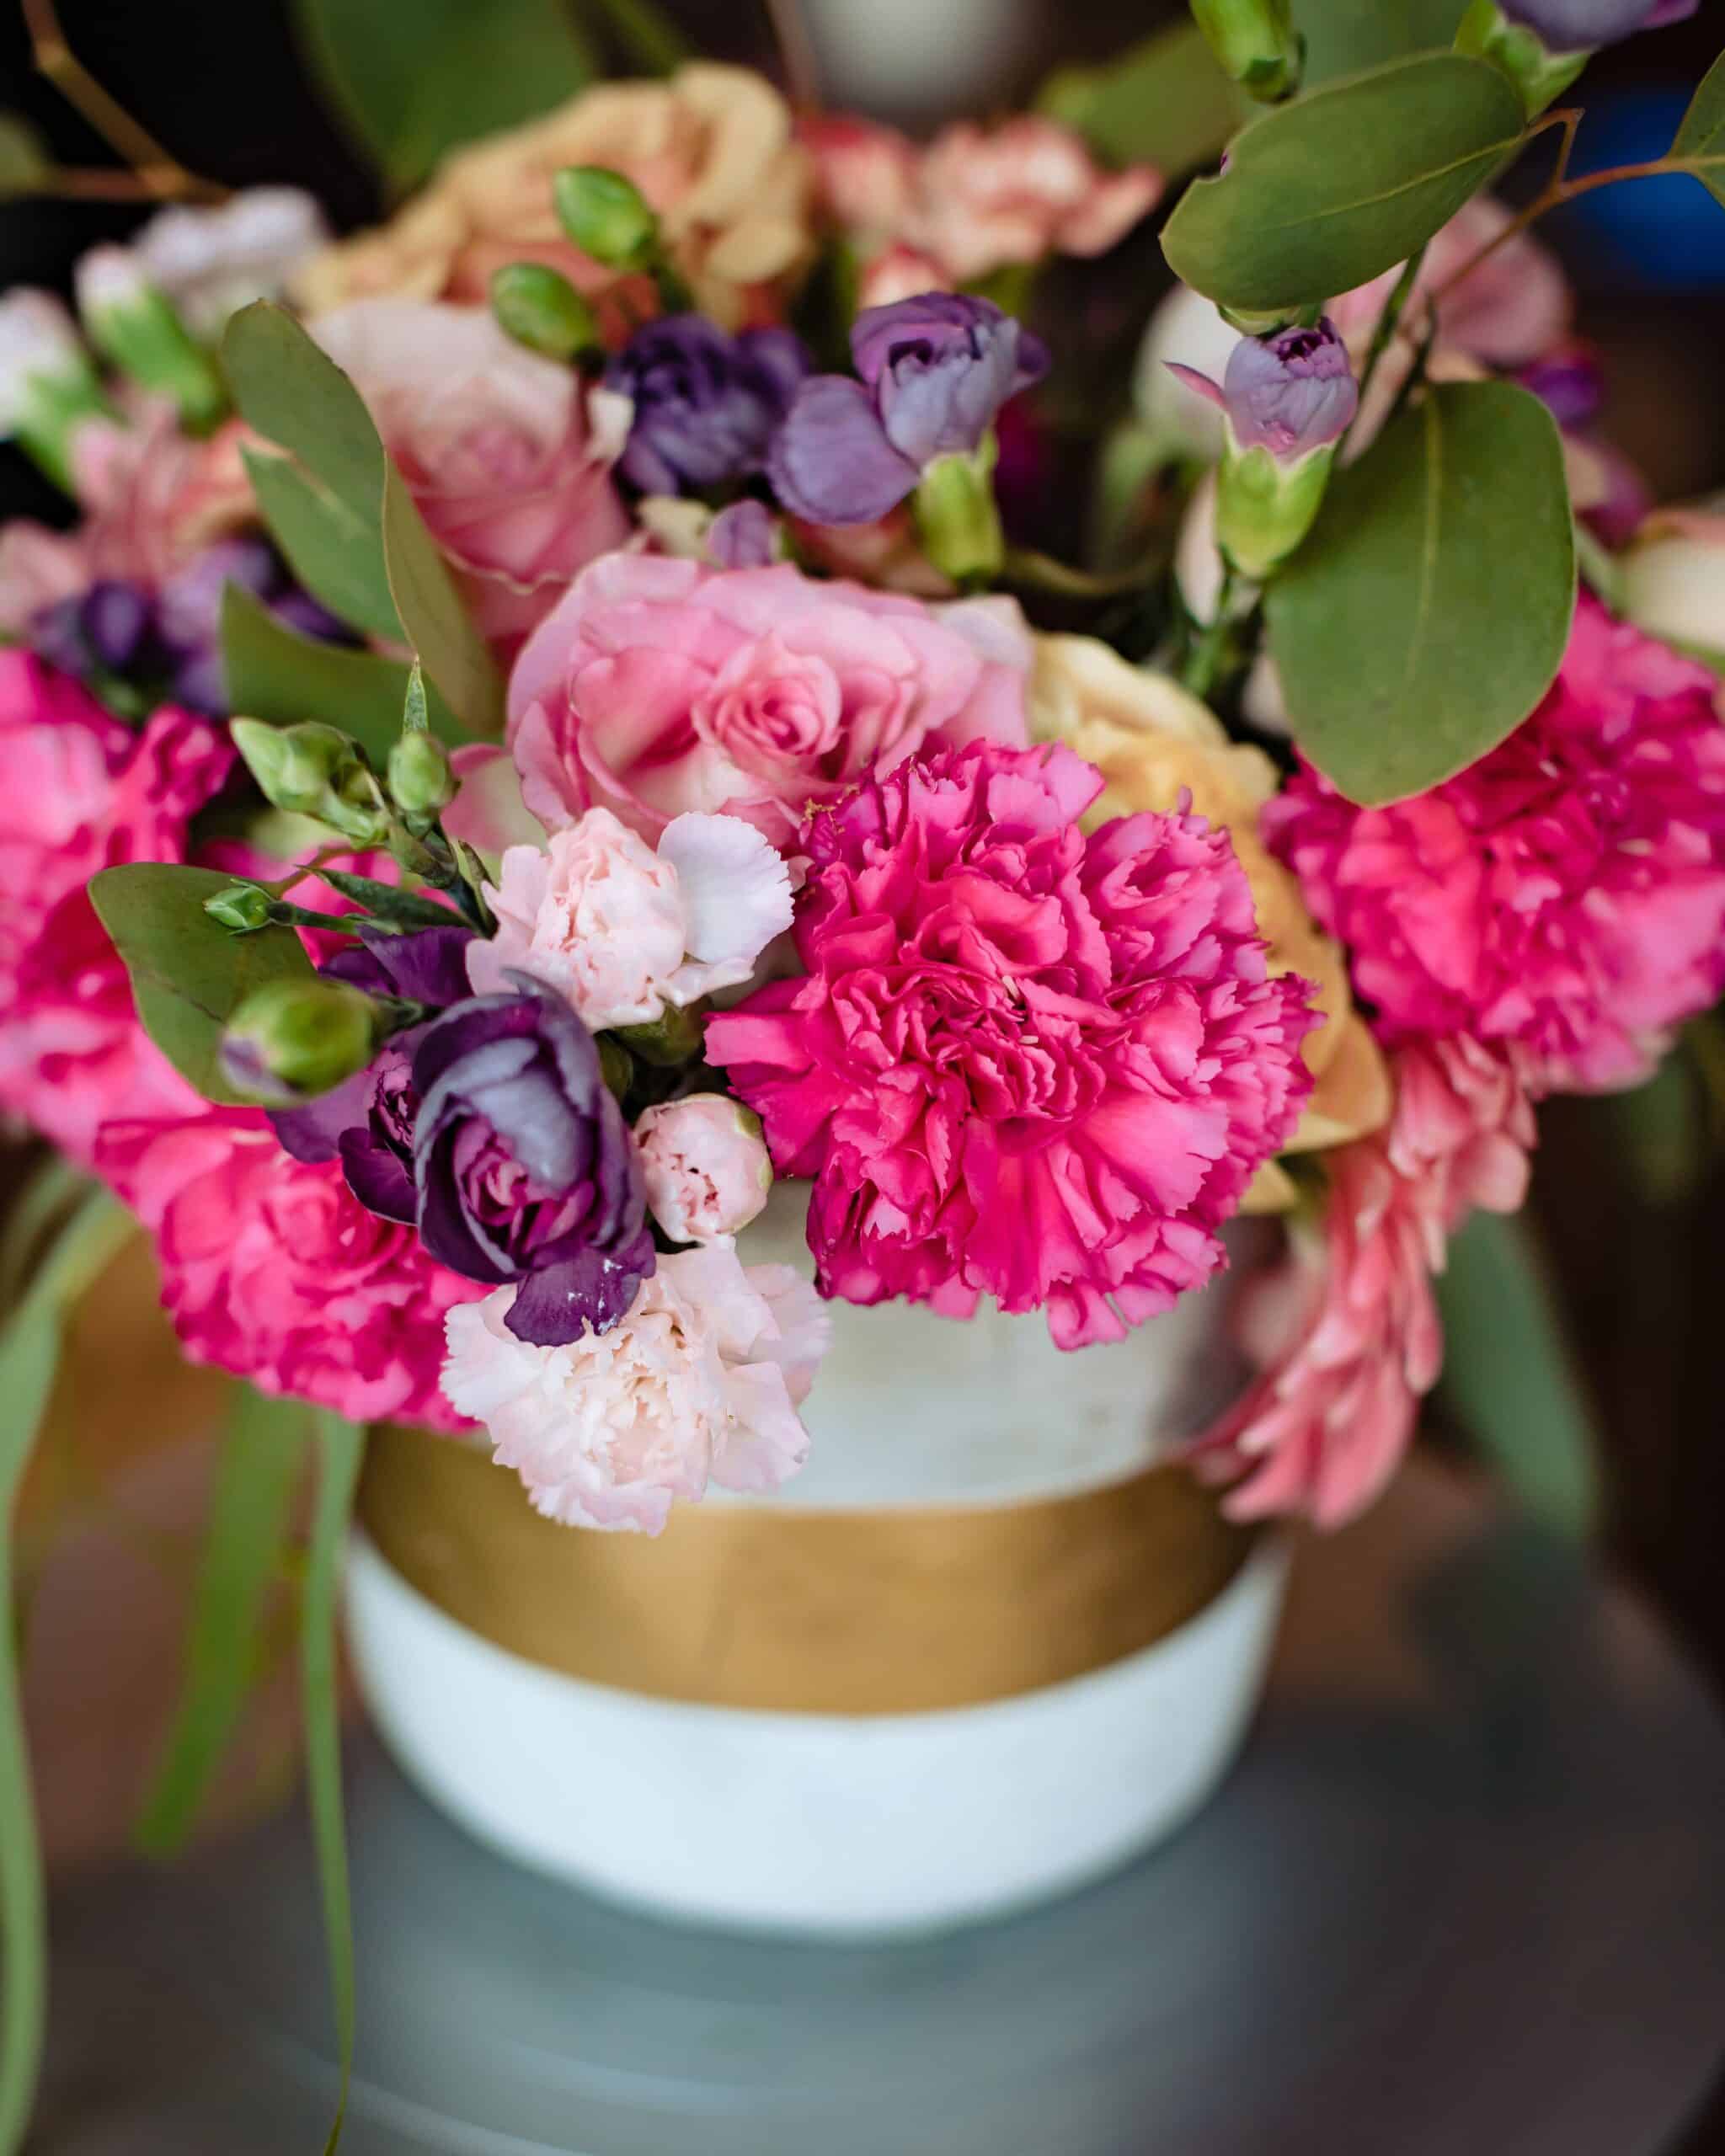 Creating Eye-Catching Flower Arrangements: Step-by-Step Guide